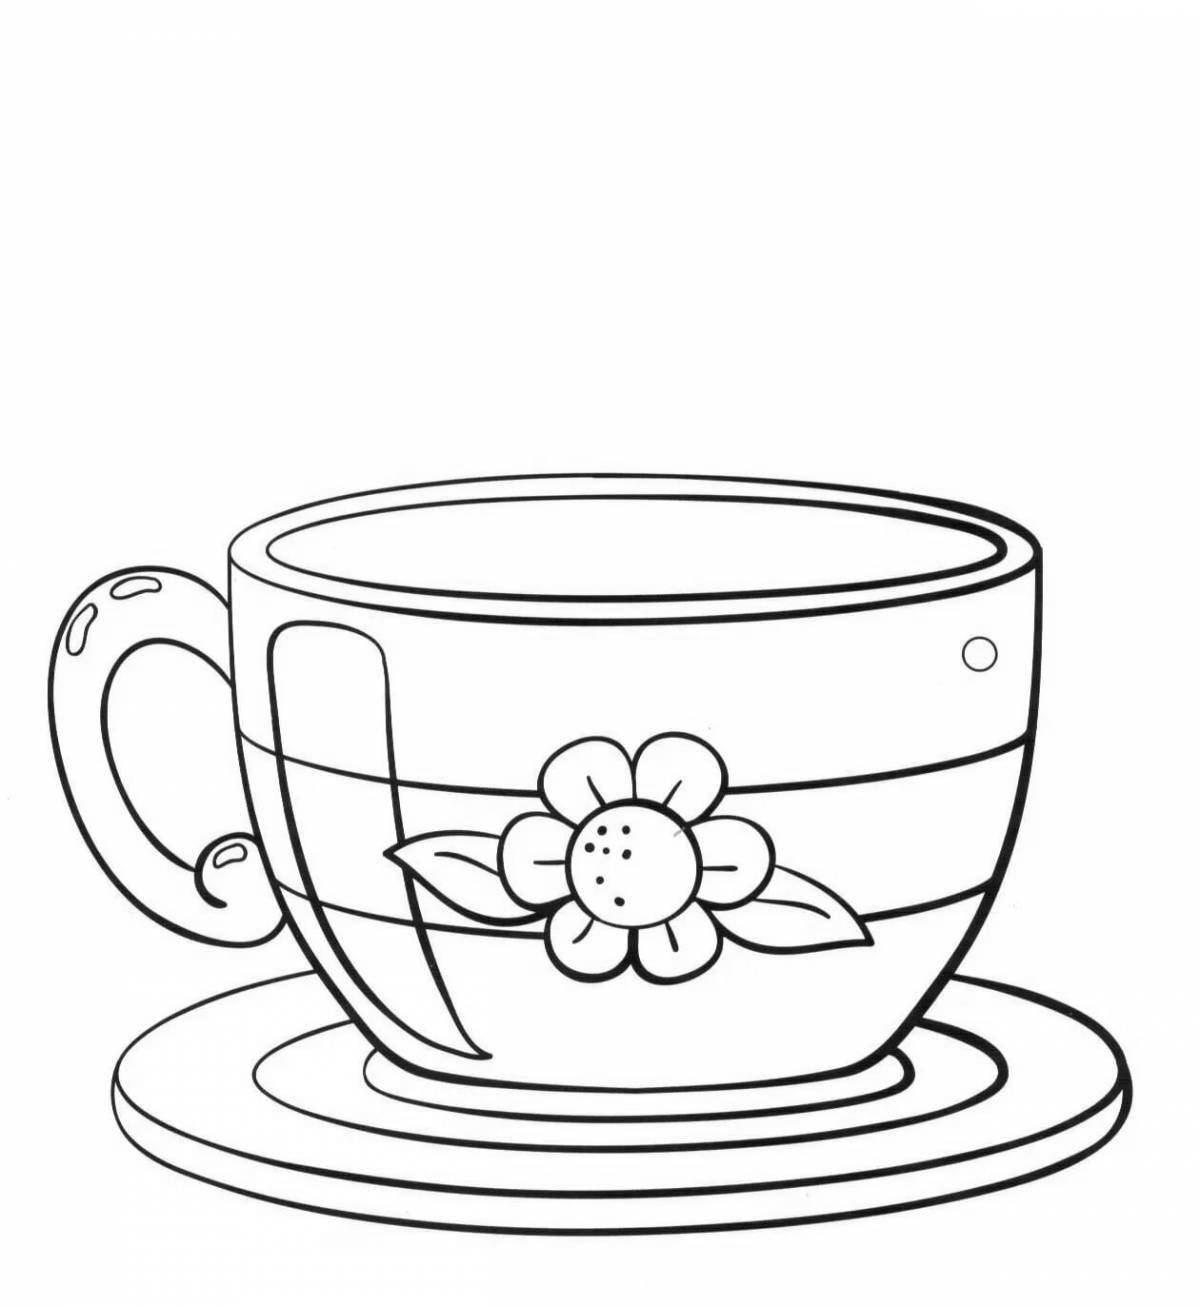 Fabulous cup of tea coloring book for kids